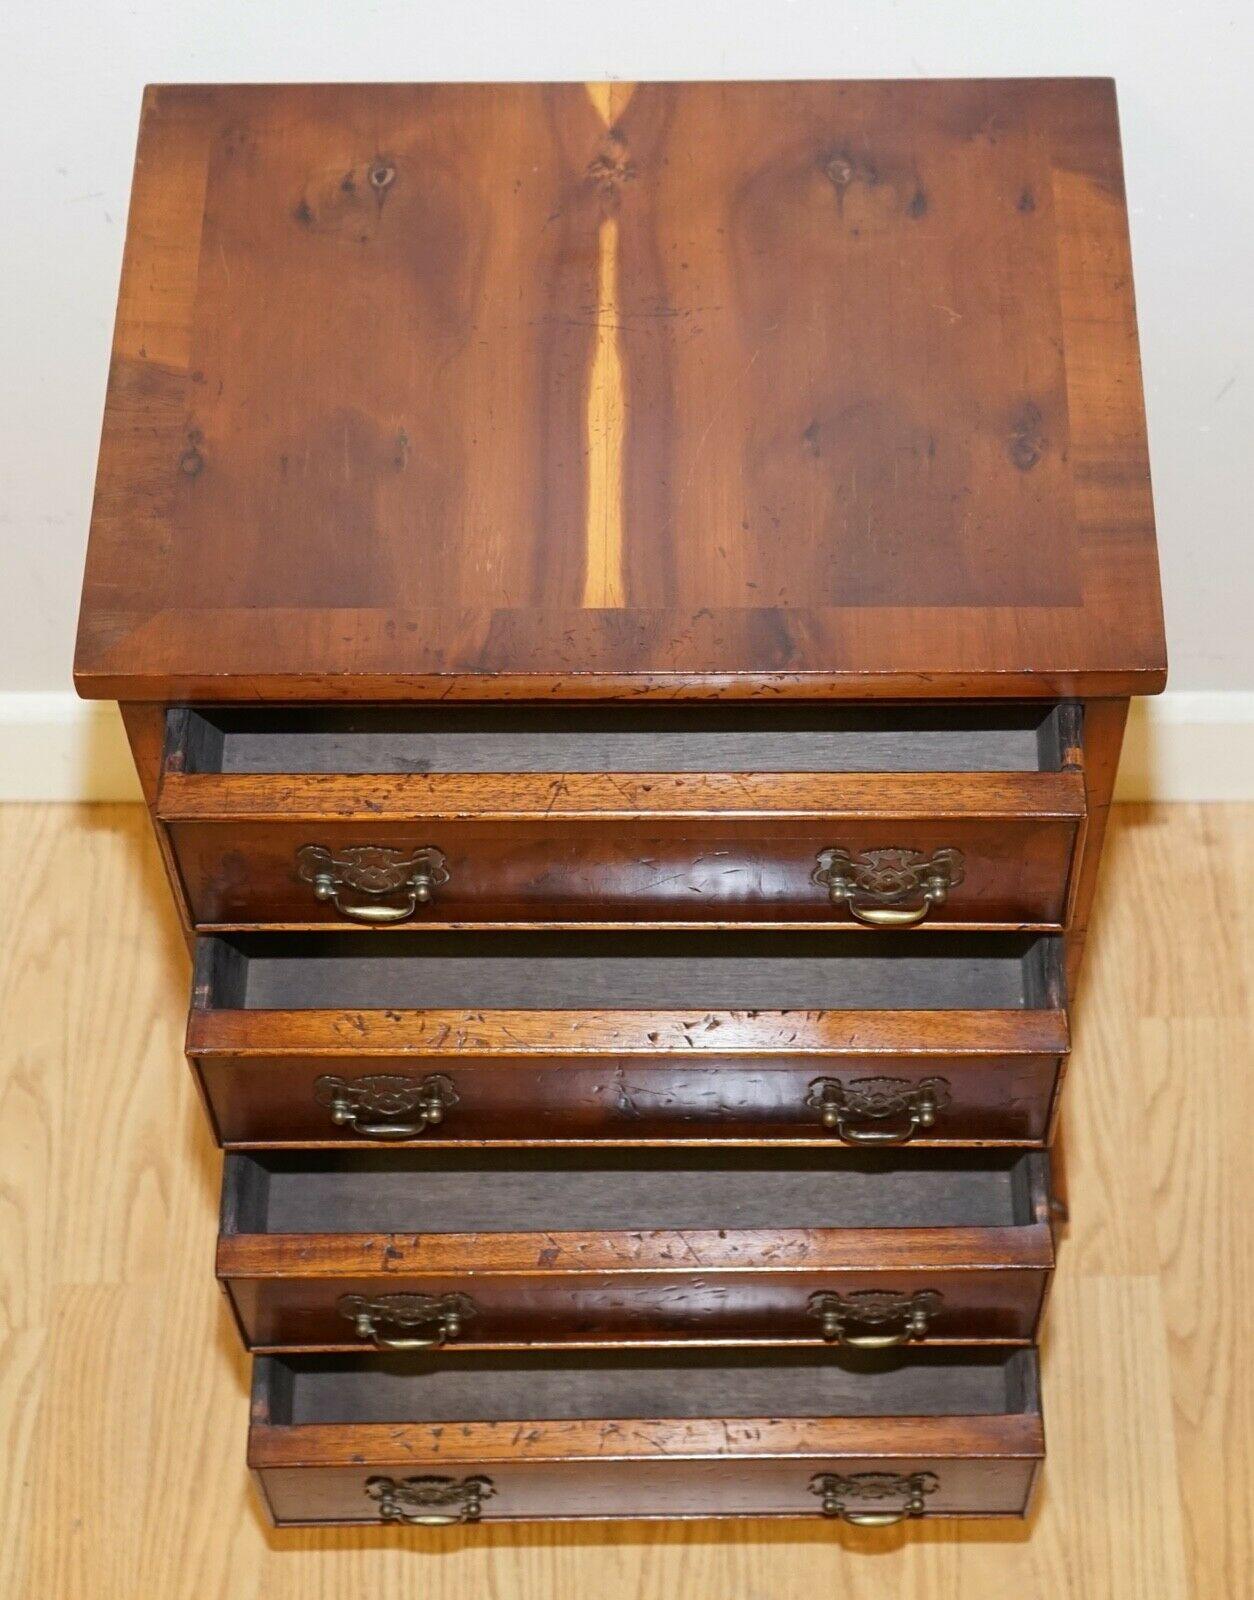 Hand-Crafted Distressed Vintage Georgian Style Yew Wood Chest of Drawers For Sale